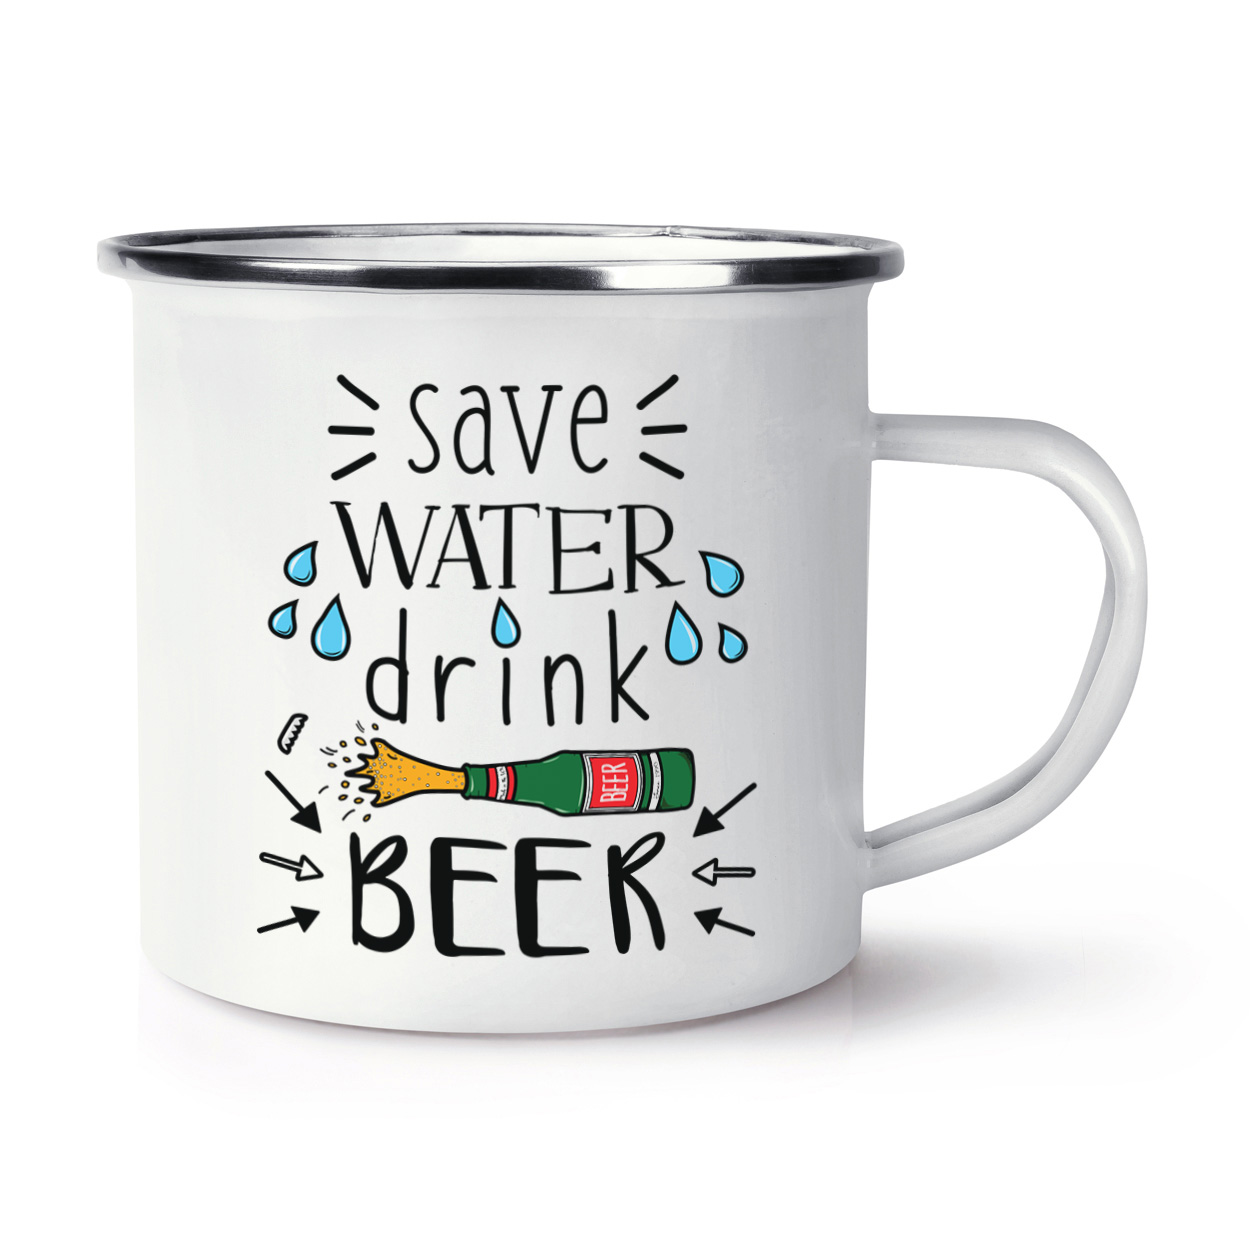 Save Water Drink Whisky Travel Mug Cup With Handle Funny Joke Drunk Alcohol